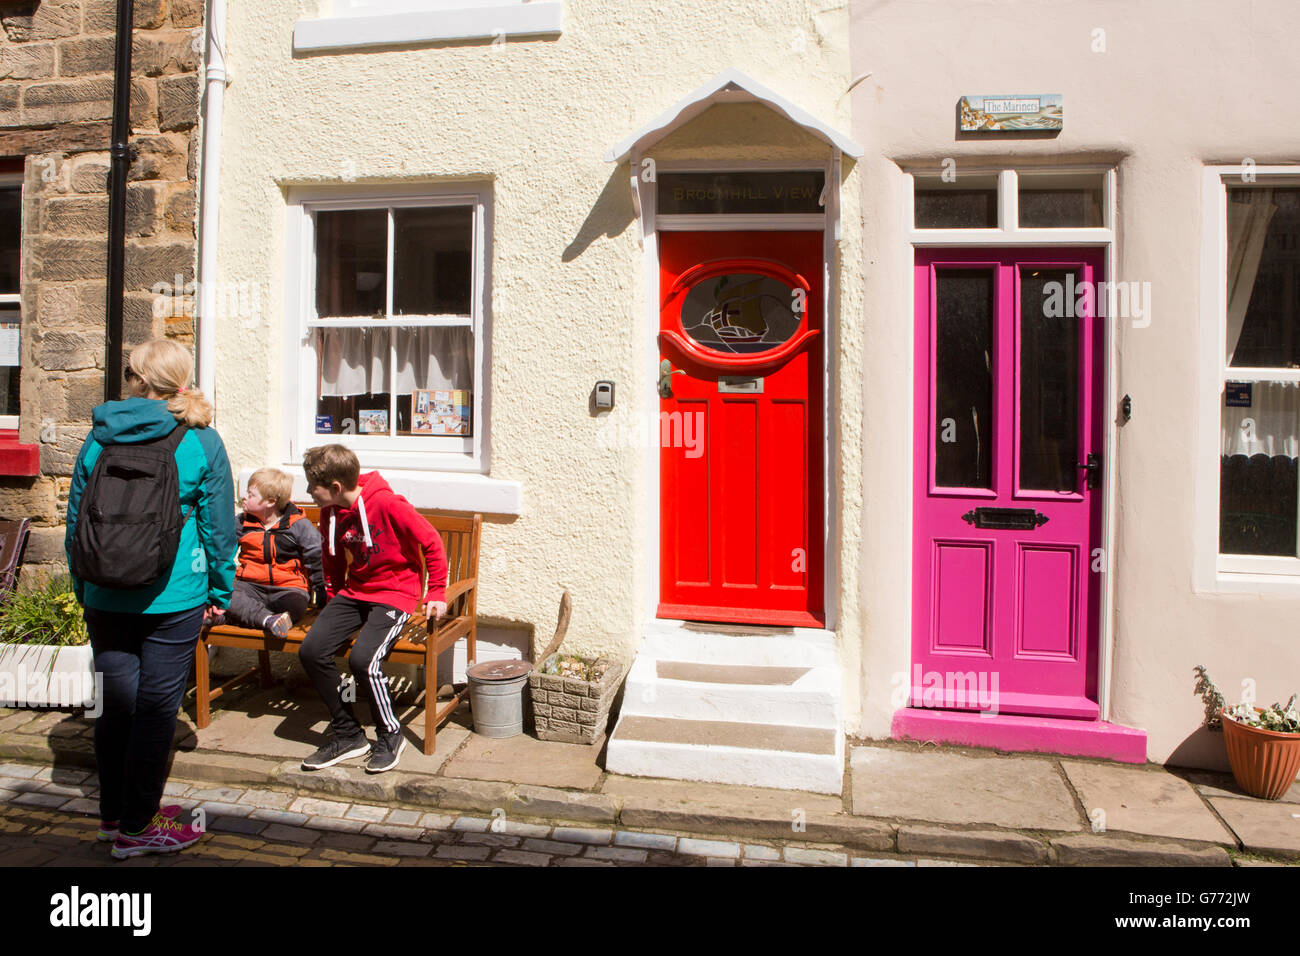 UK, England, Yorkshire, Staithes, High Street, people on bench in sun by bright red and purple painted doors Stock Photo